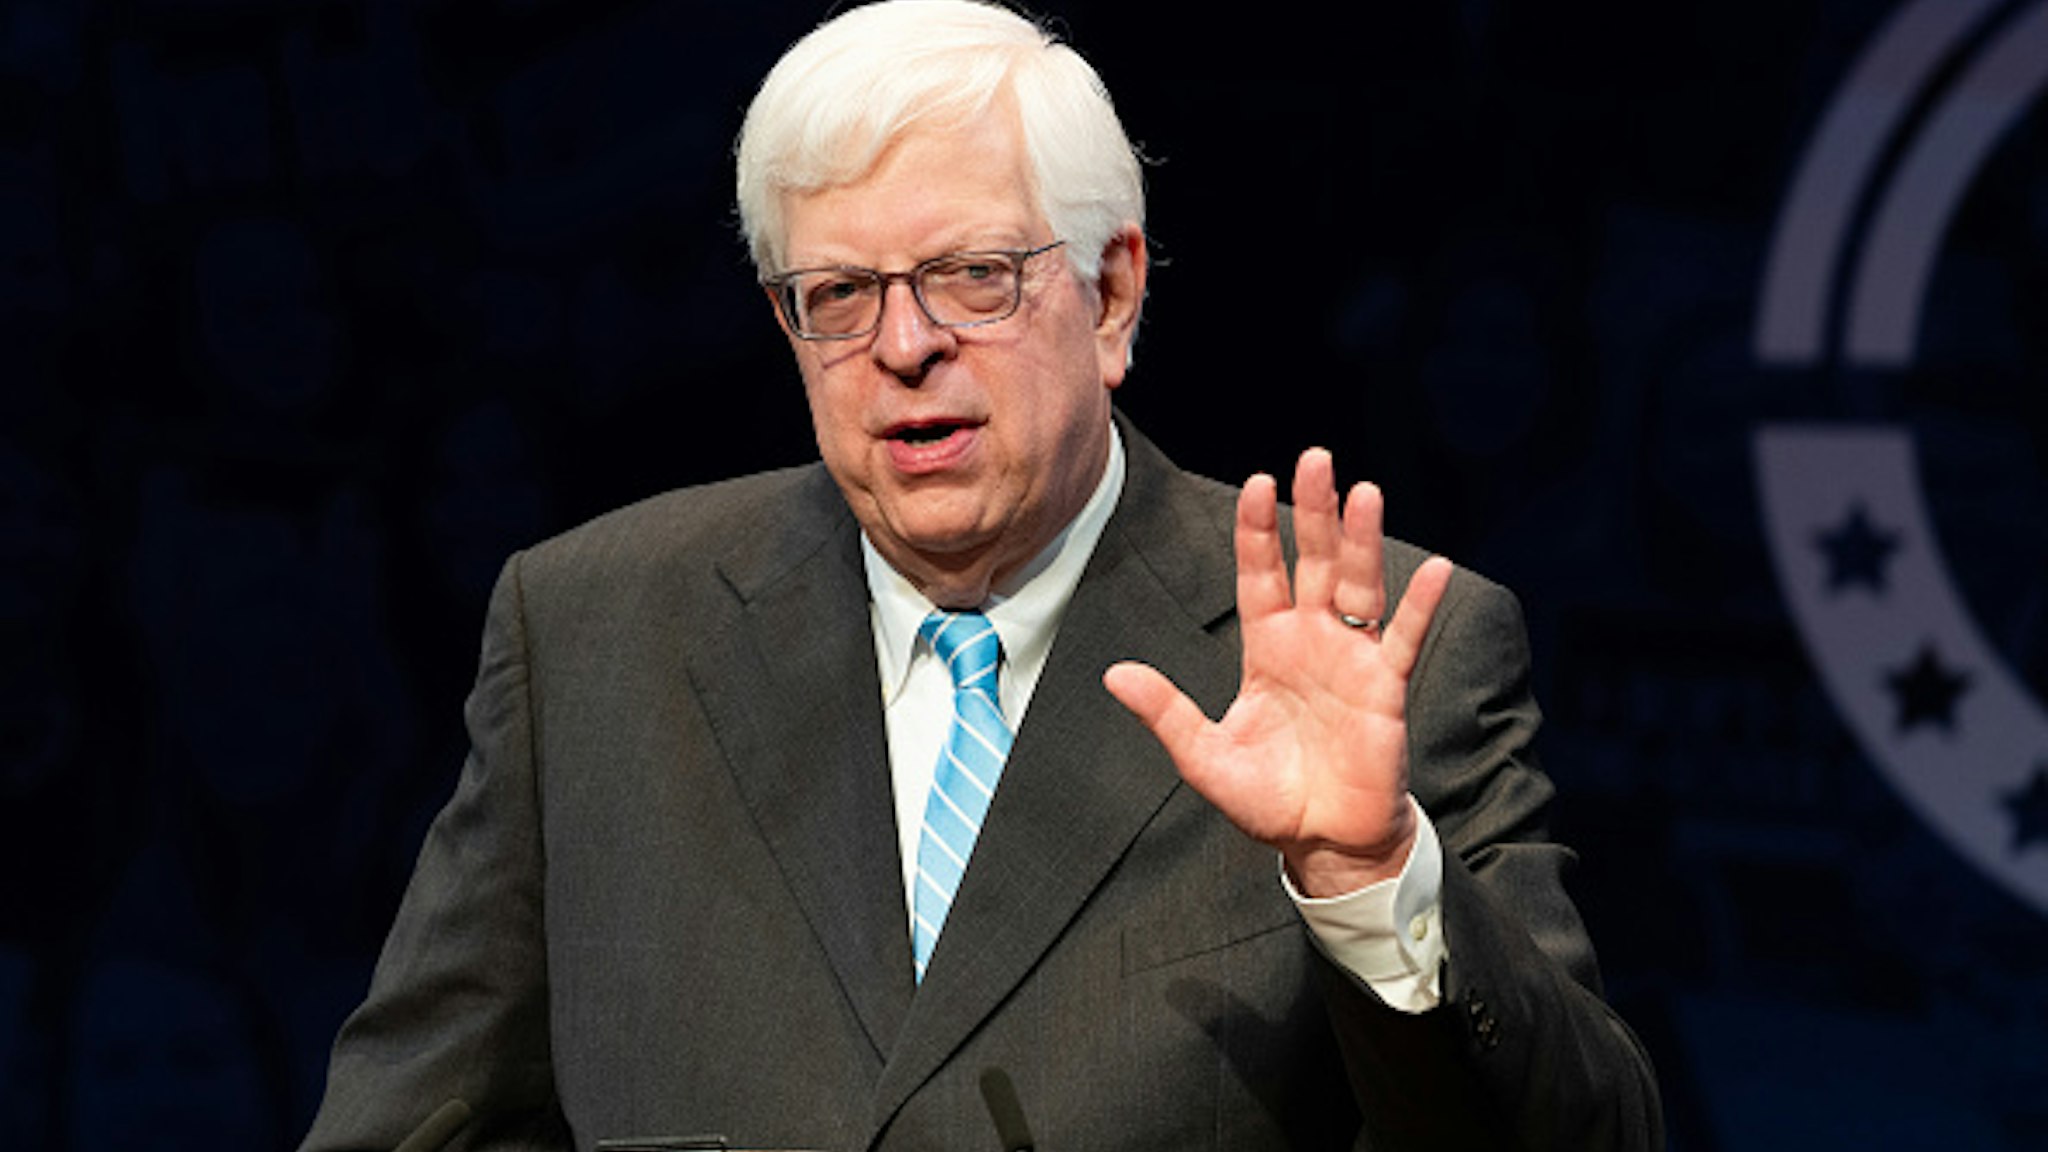 Dennis Prager, nationally syndicated conservative radio talk show host and writer, speaking at the Turning Point High School Leadership Summit in Washington, DC.